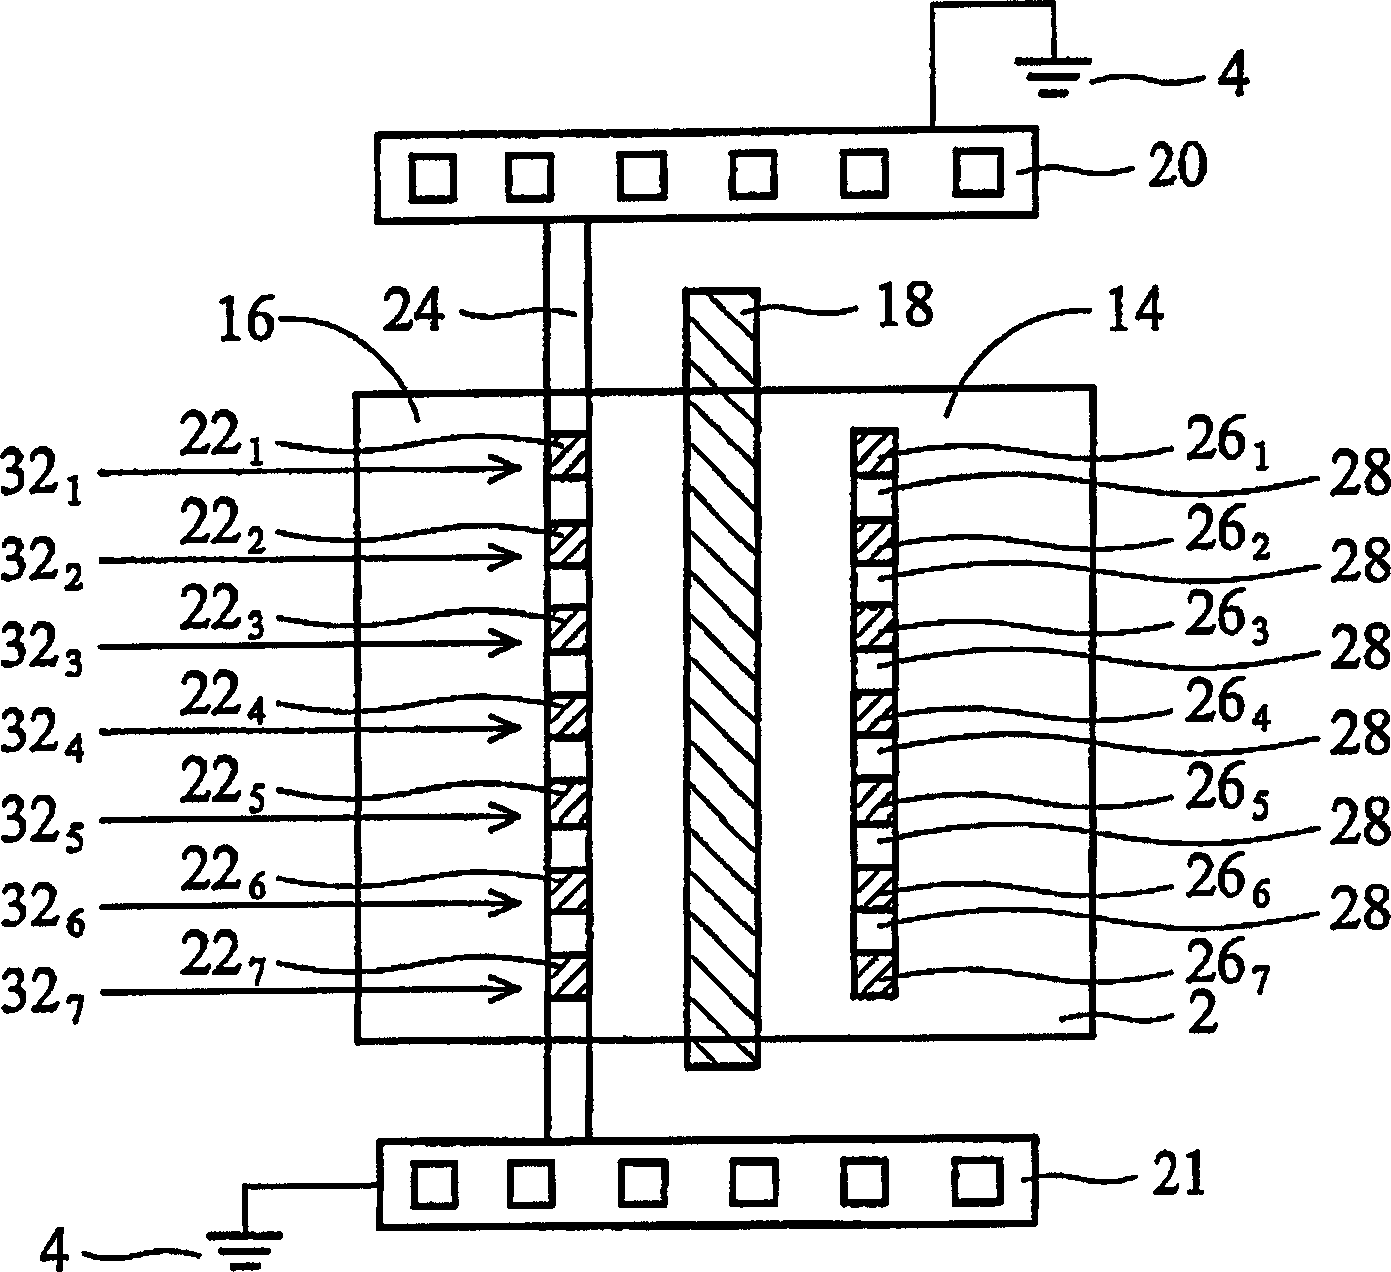 A semiconductor structure for electrostatic discharge protection